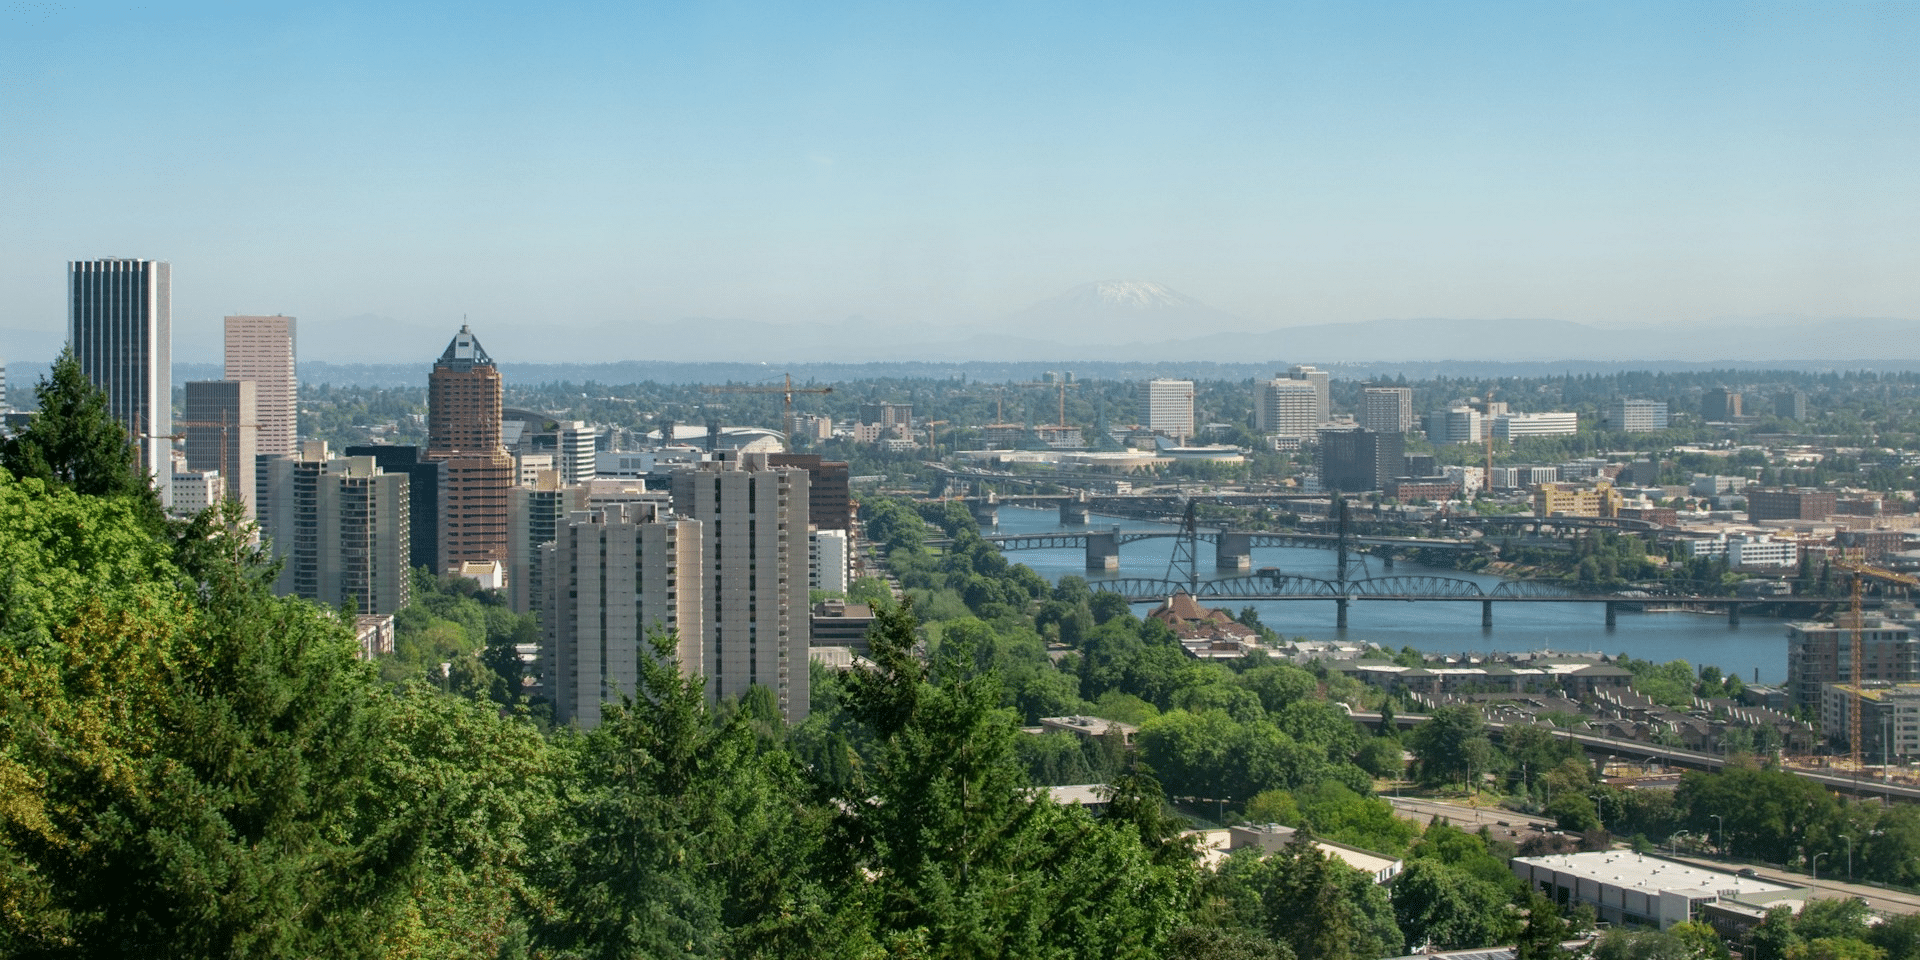 Essential Rules to Keep in Mind When Visiting Portland